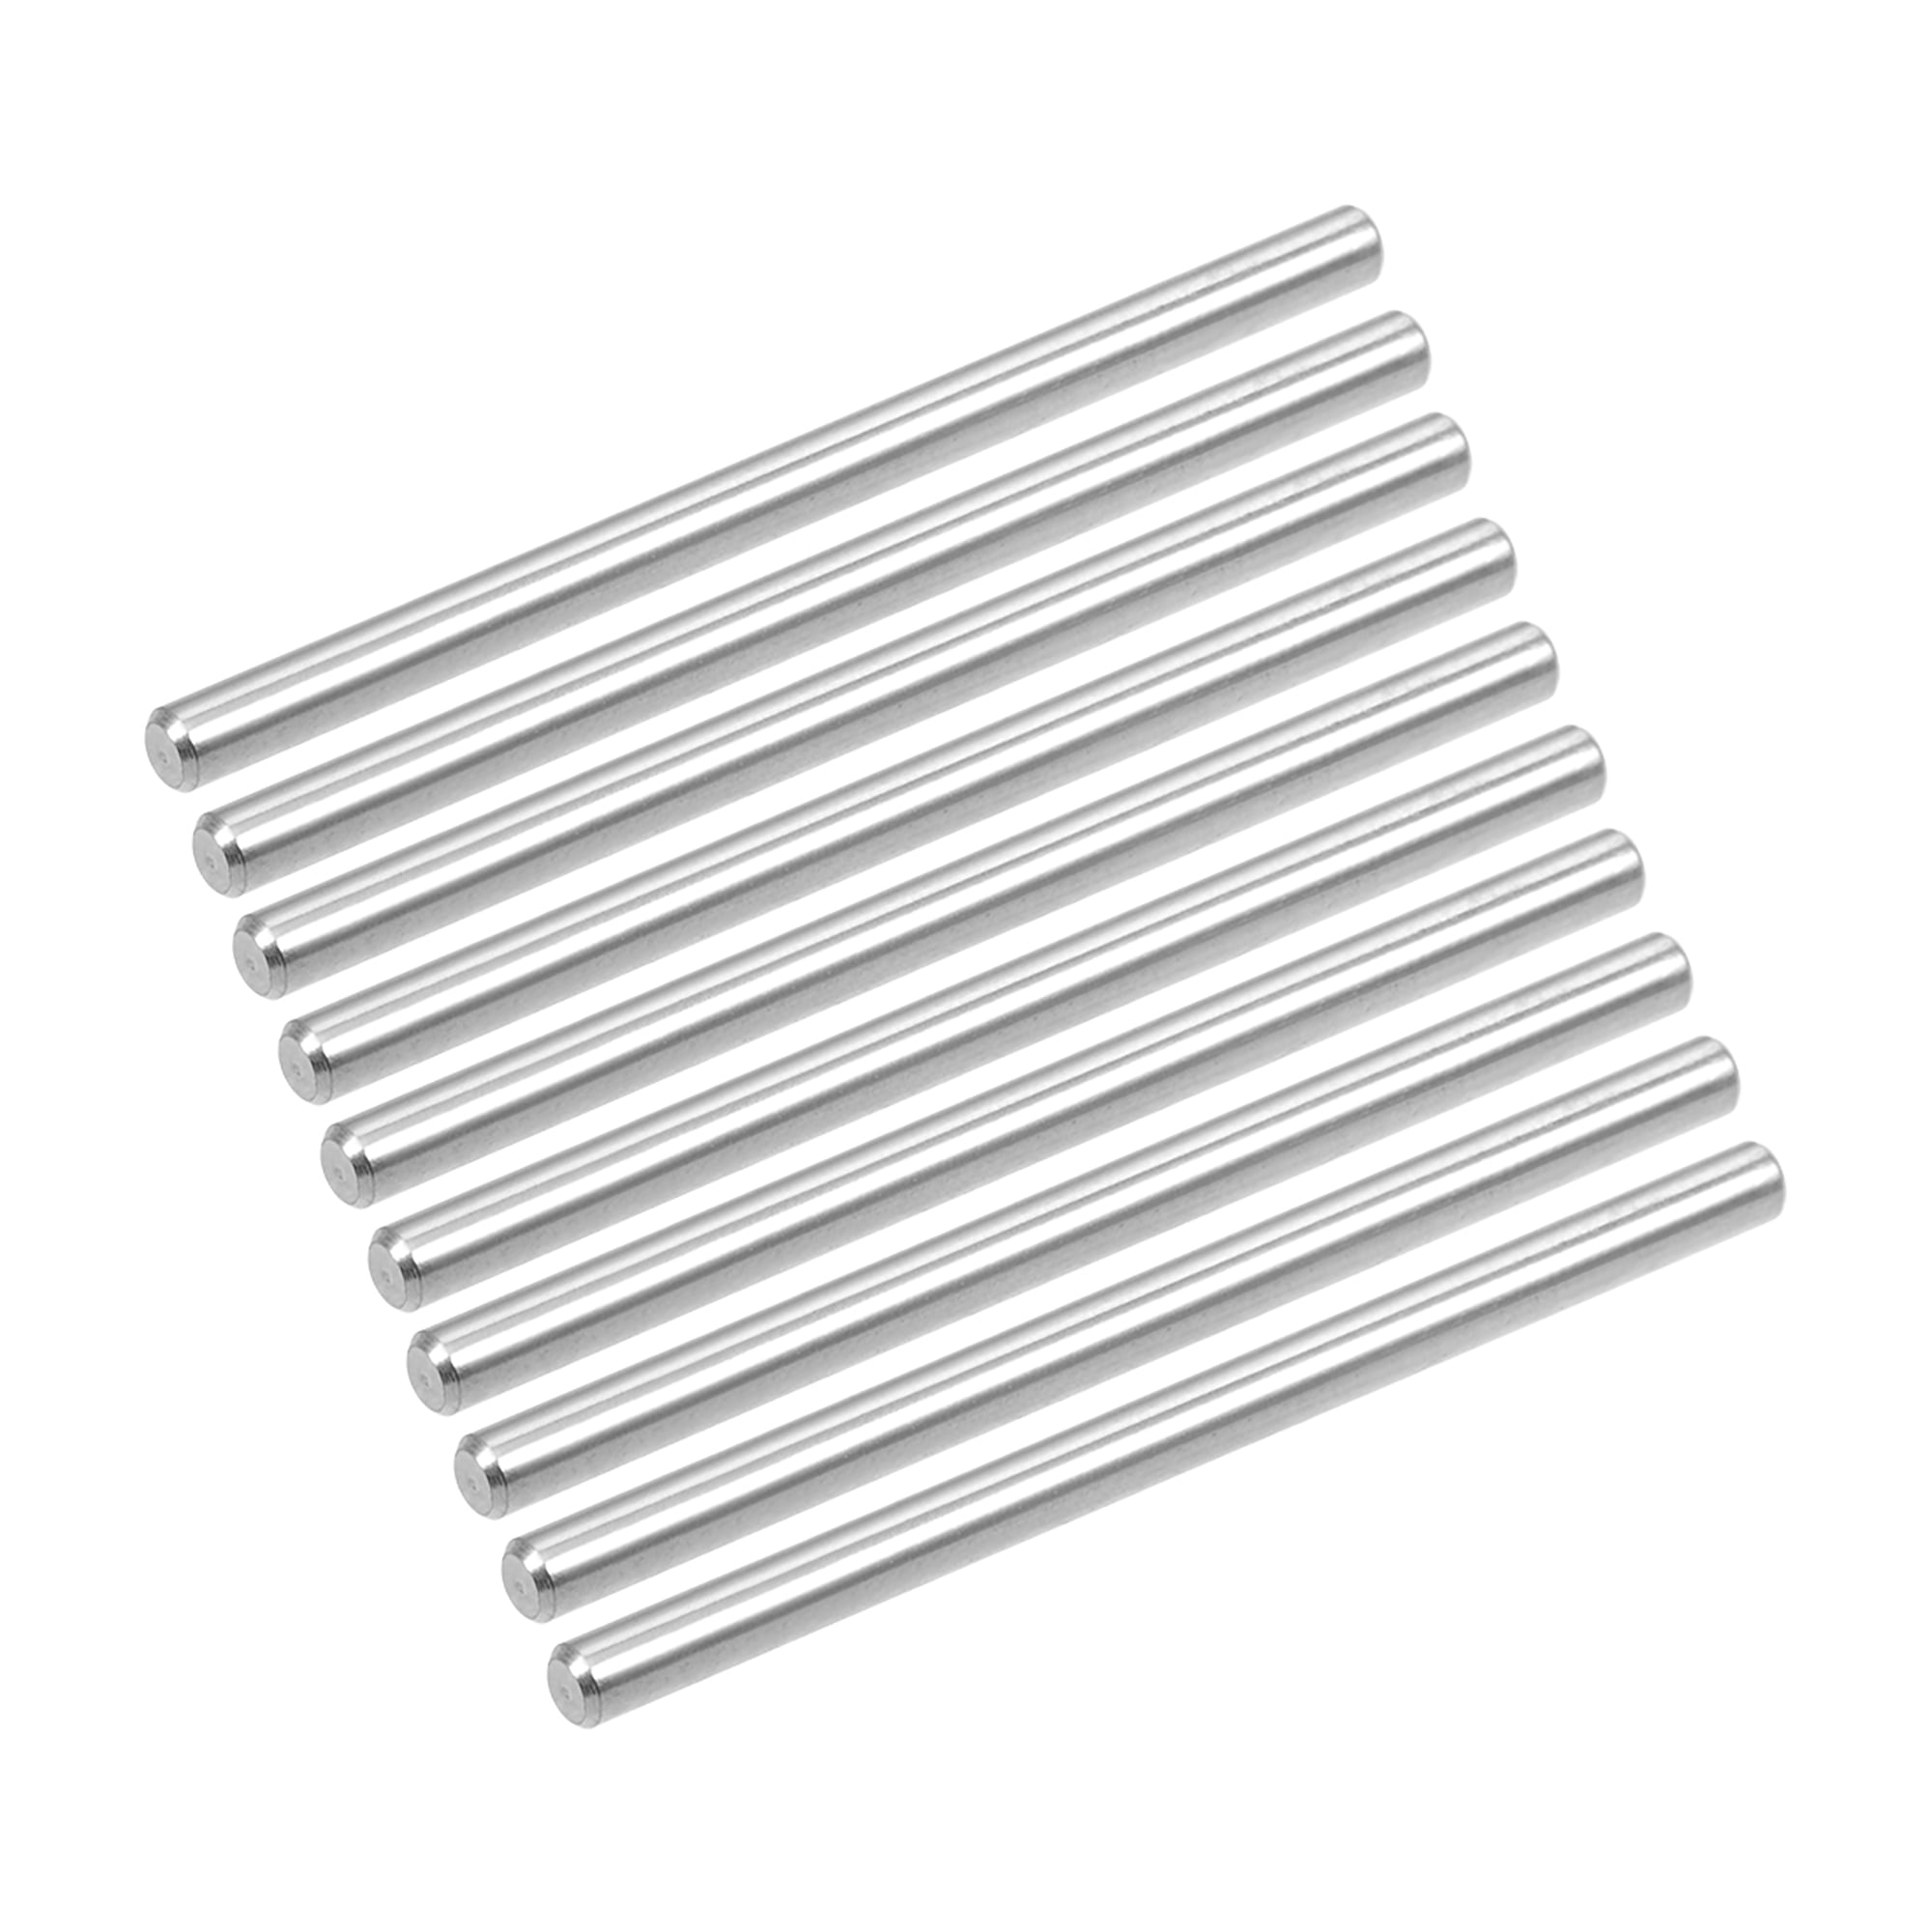 MroMax 10pcs 3X40mm Dowel Pin 304 Stainless Steel Wood Bunk Bed Dowel Pins Shelf Pegs Support Shelves Silver Tone 